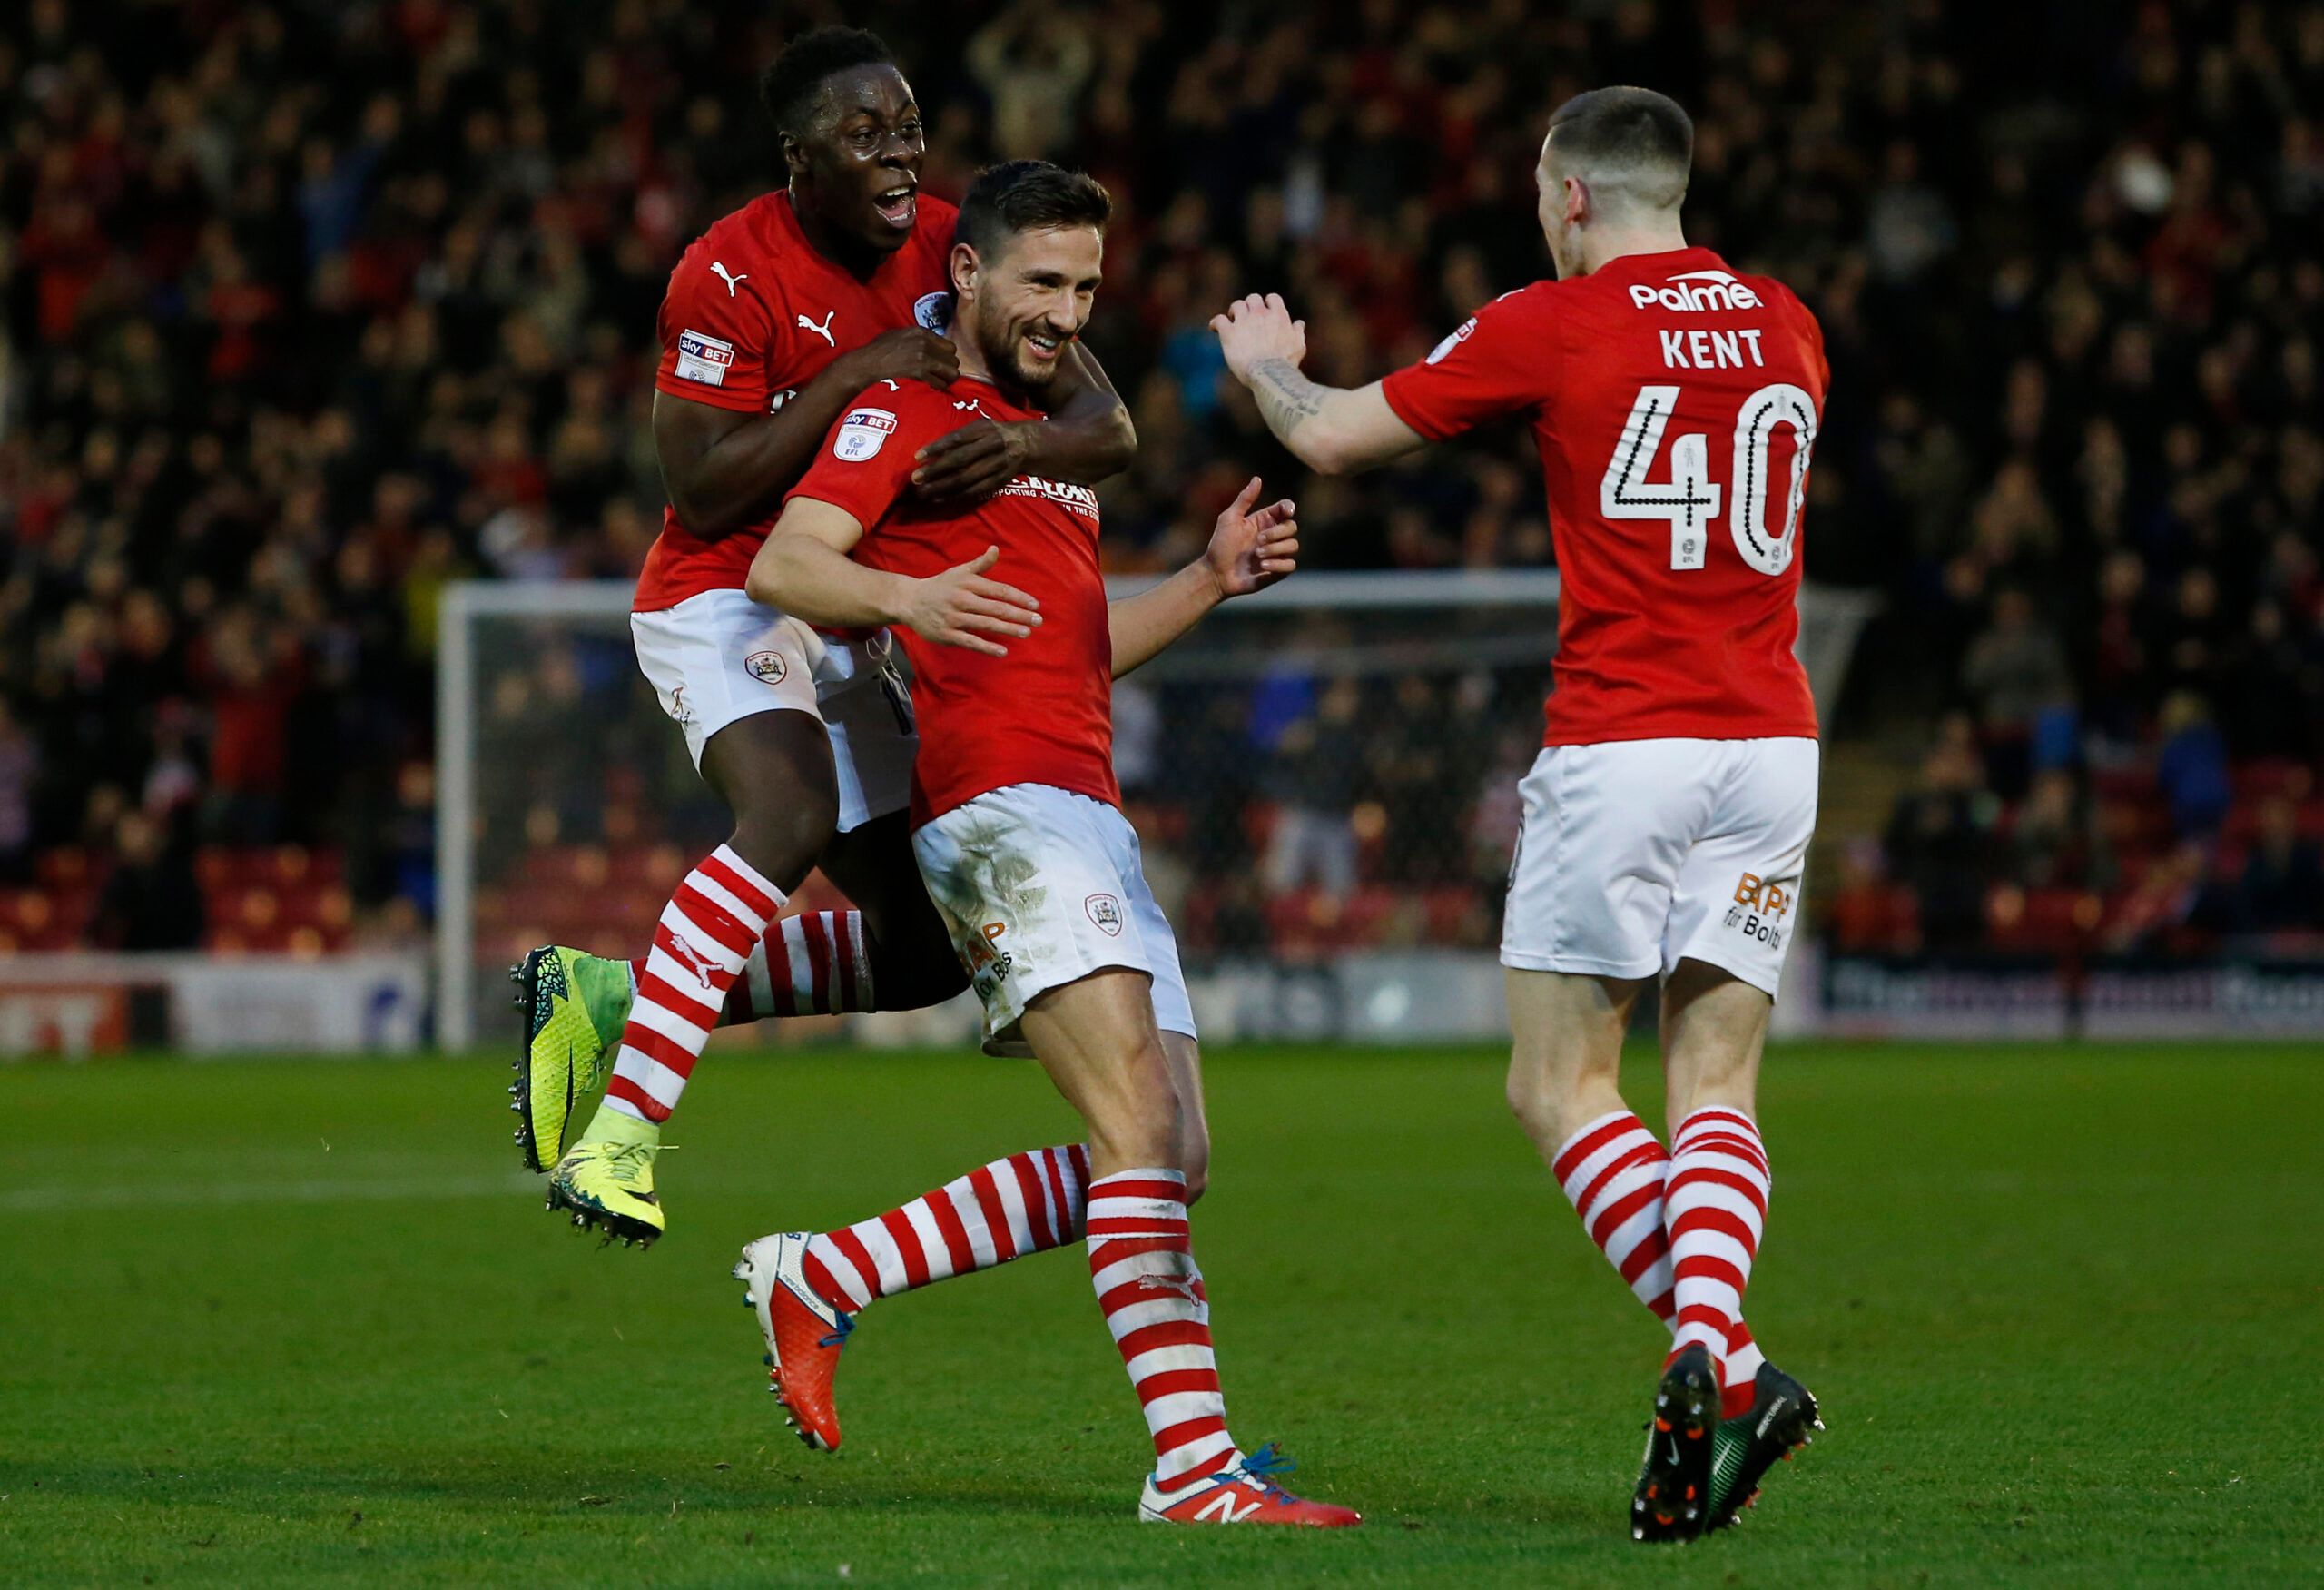 Football Soccer Britain - Barnsley v Norwich City - Sky Bet Championship - Oakwell - 10/12/16 Conor Hourihane (C) celebrates with Andy Yiadom (L) and Ryan Kent after scoring the second goal for Barnsley Mandatory Credit: Action Images / Ed Sykes Livepic EDITORIAL USE ONLY. No use with unauthorized audio, video, data, fixture lists, club/league logos or 